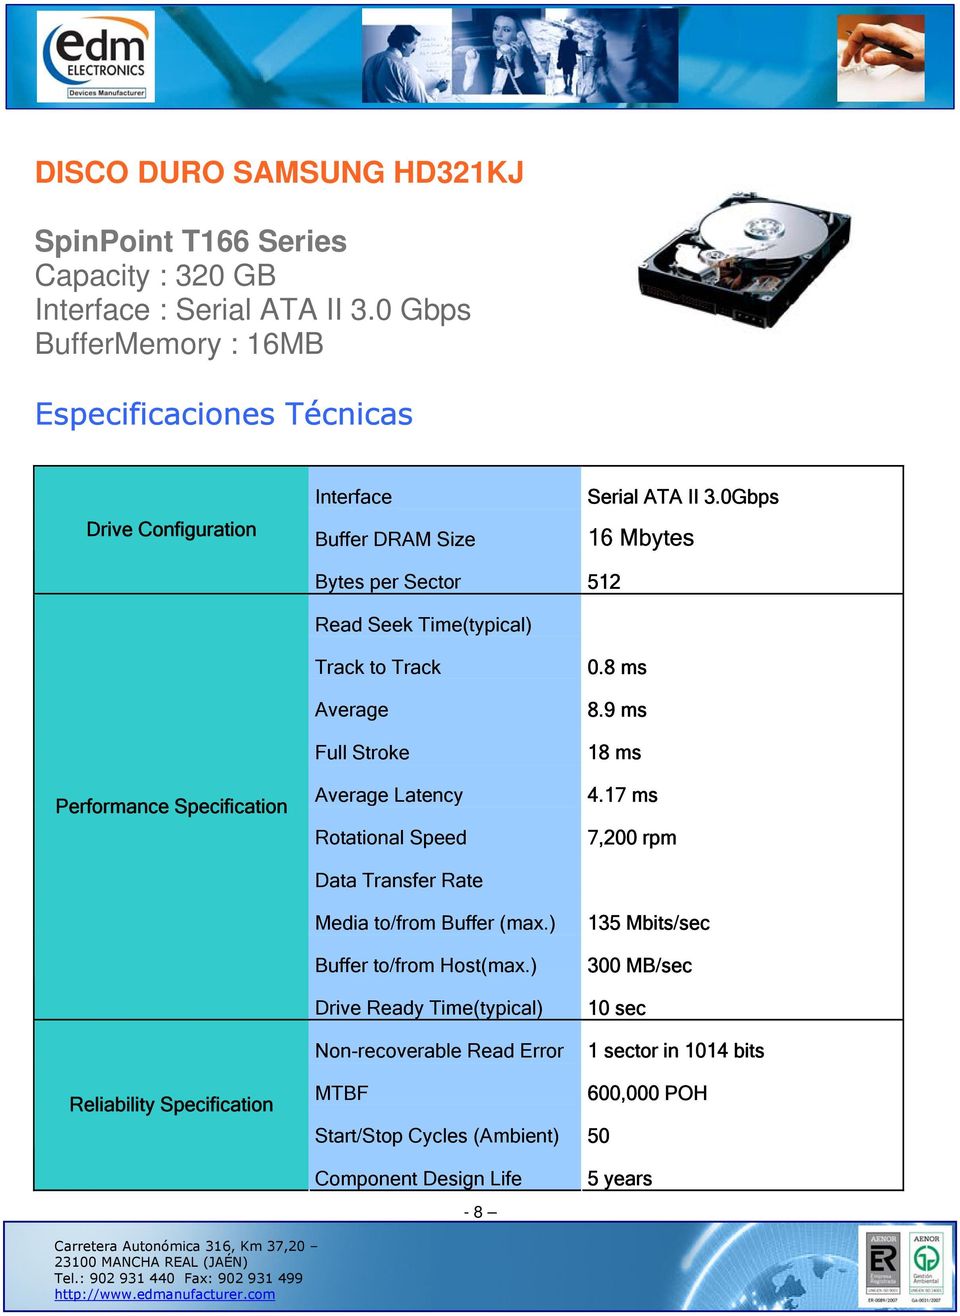 0Gbps 16 Mbytes Bytes per Sector 512 Read Seek Time(typical) Performance Specification Track to Track Average Full Stroke Average Latency Rotational Speed Data Transfer